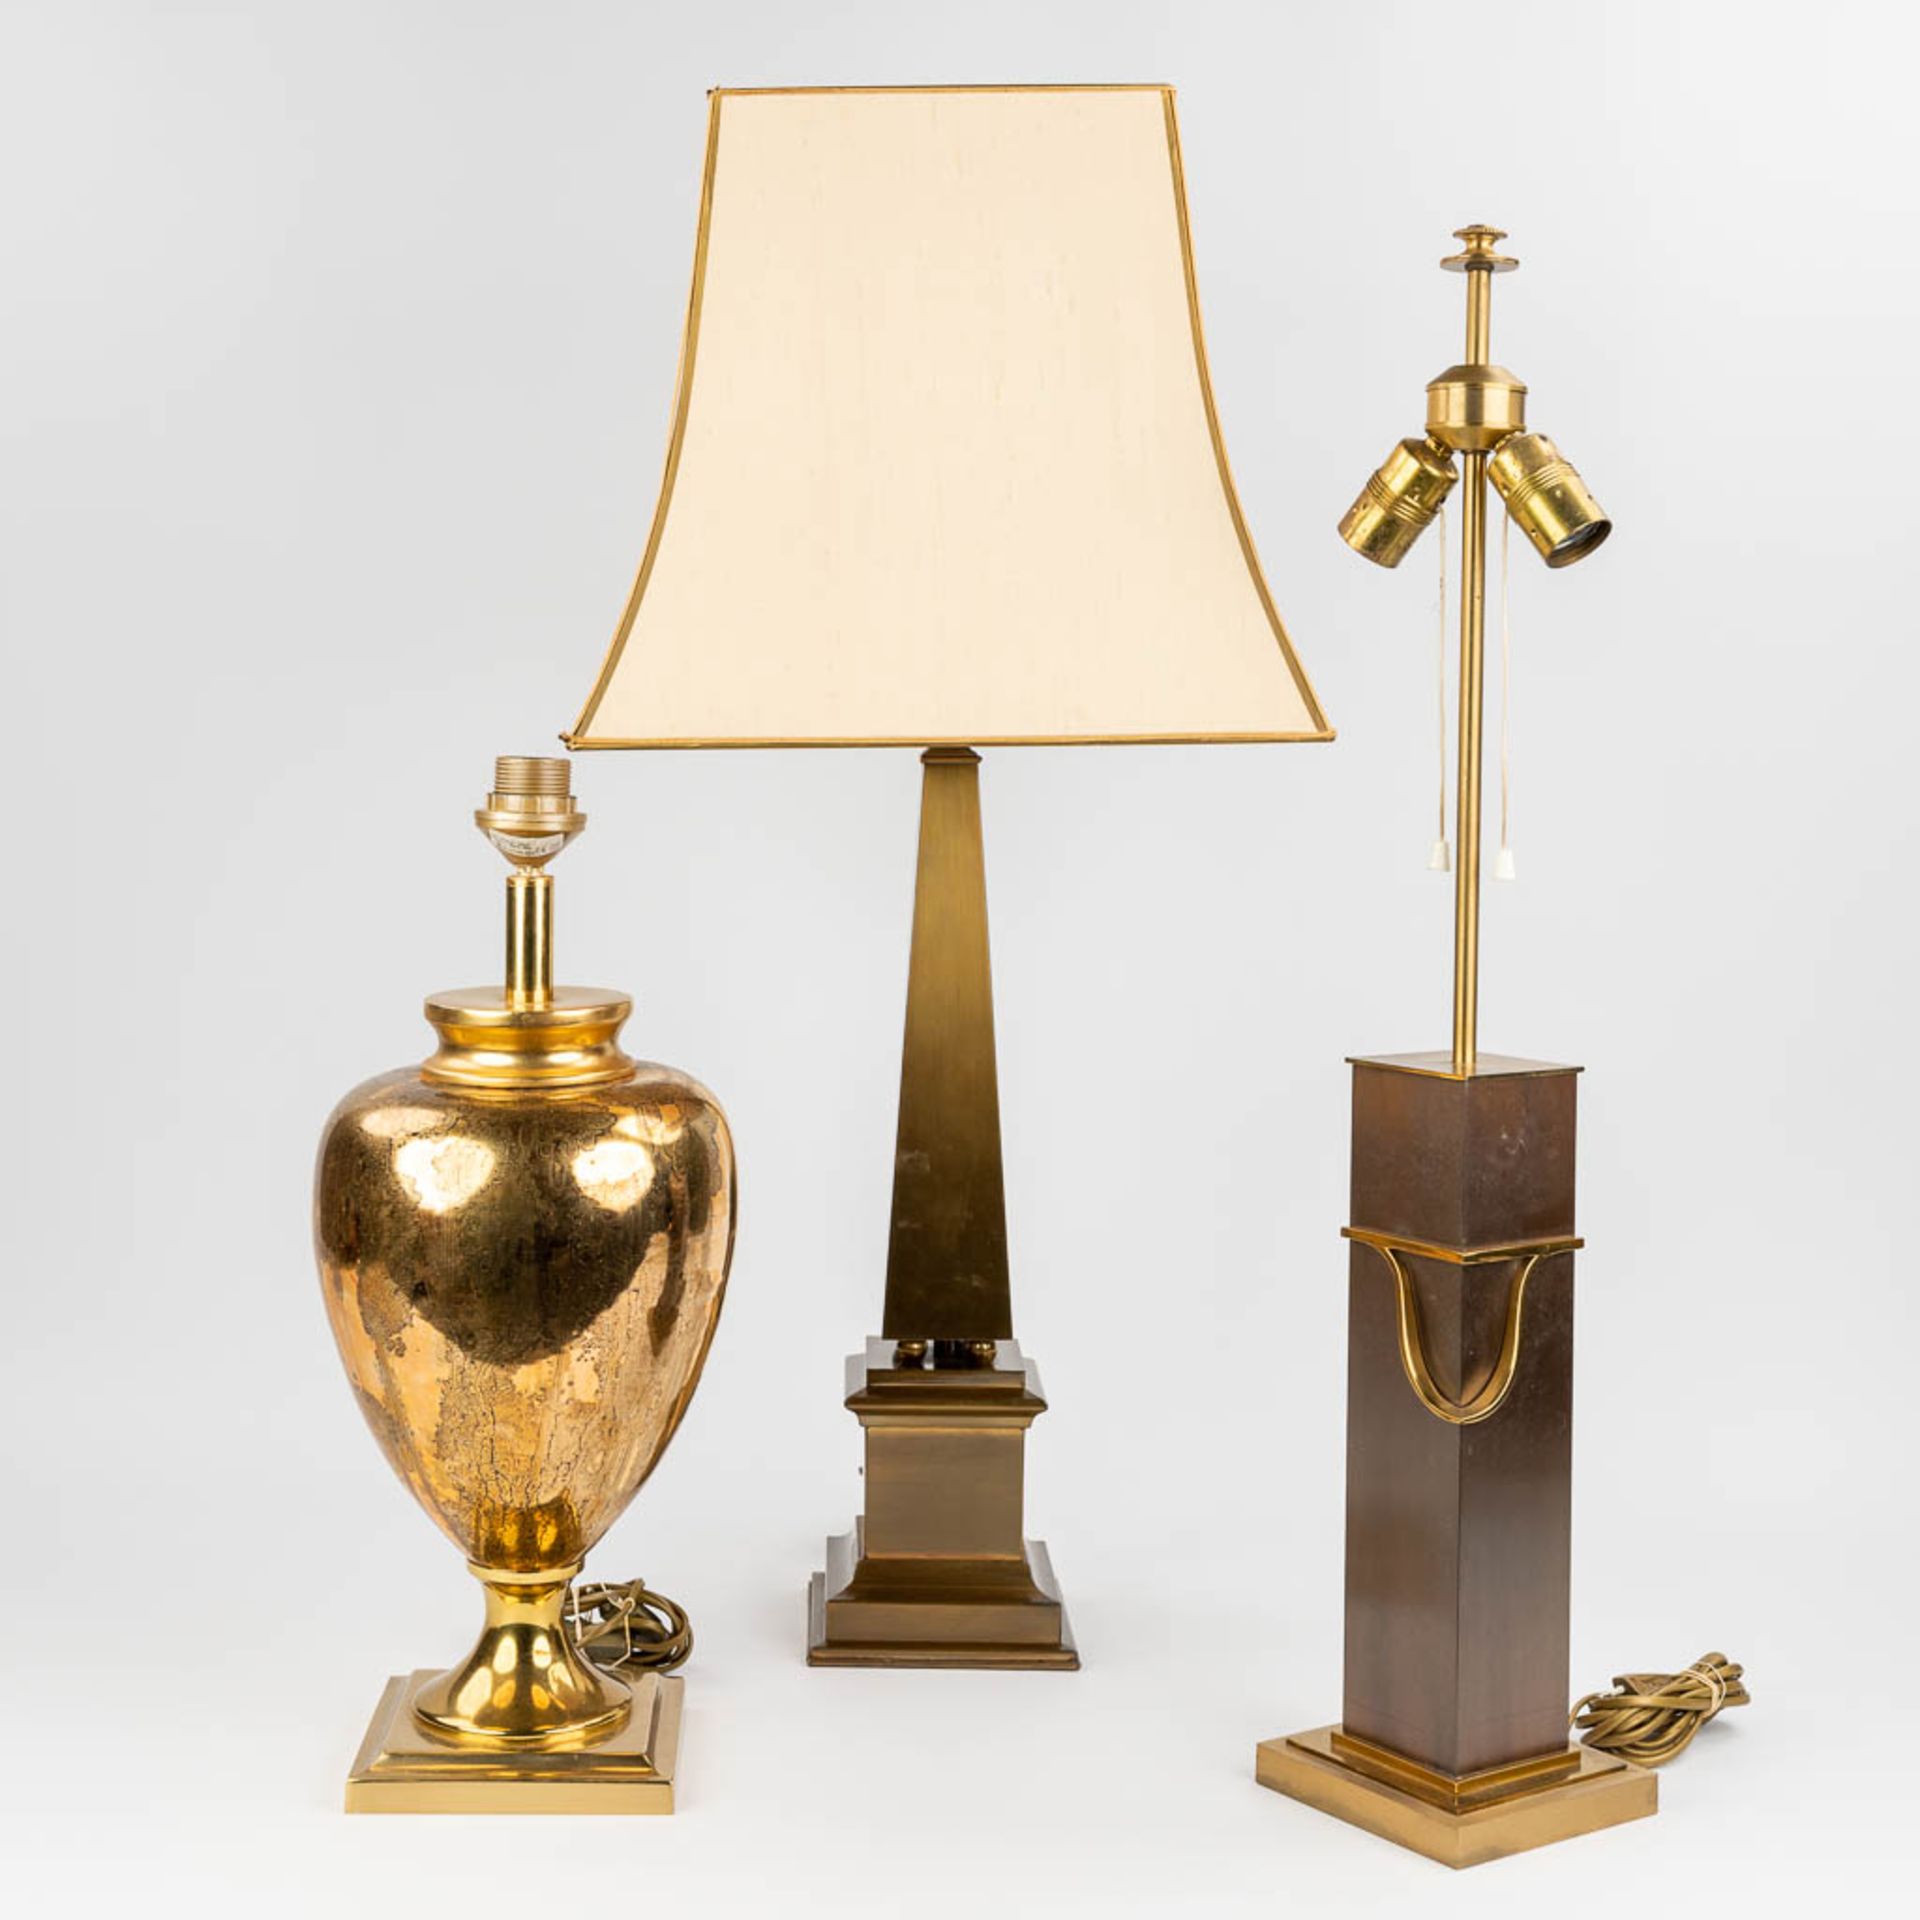 A collection of 3 mid-C. brass and metal table lamps. (14 x 14 x 80cm)